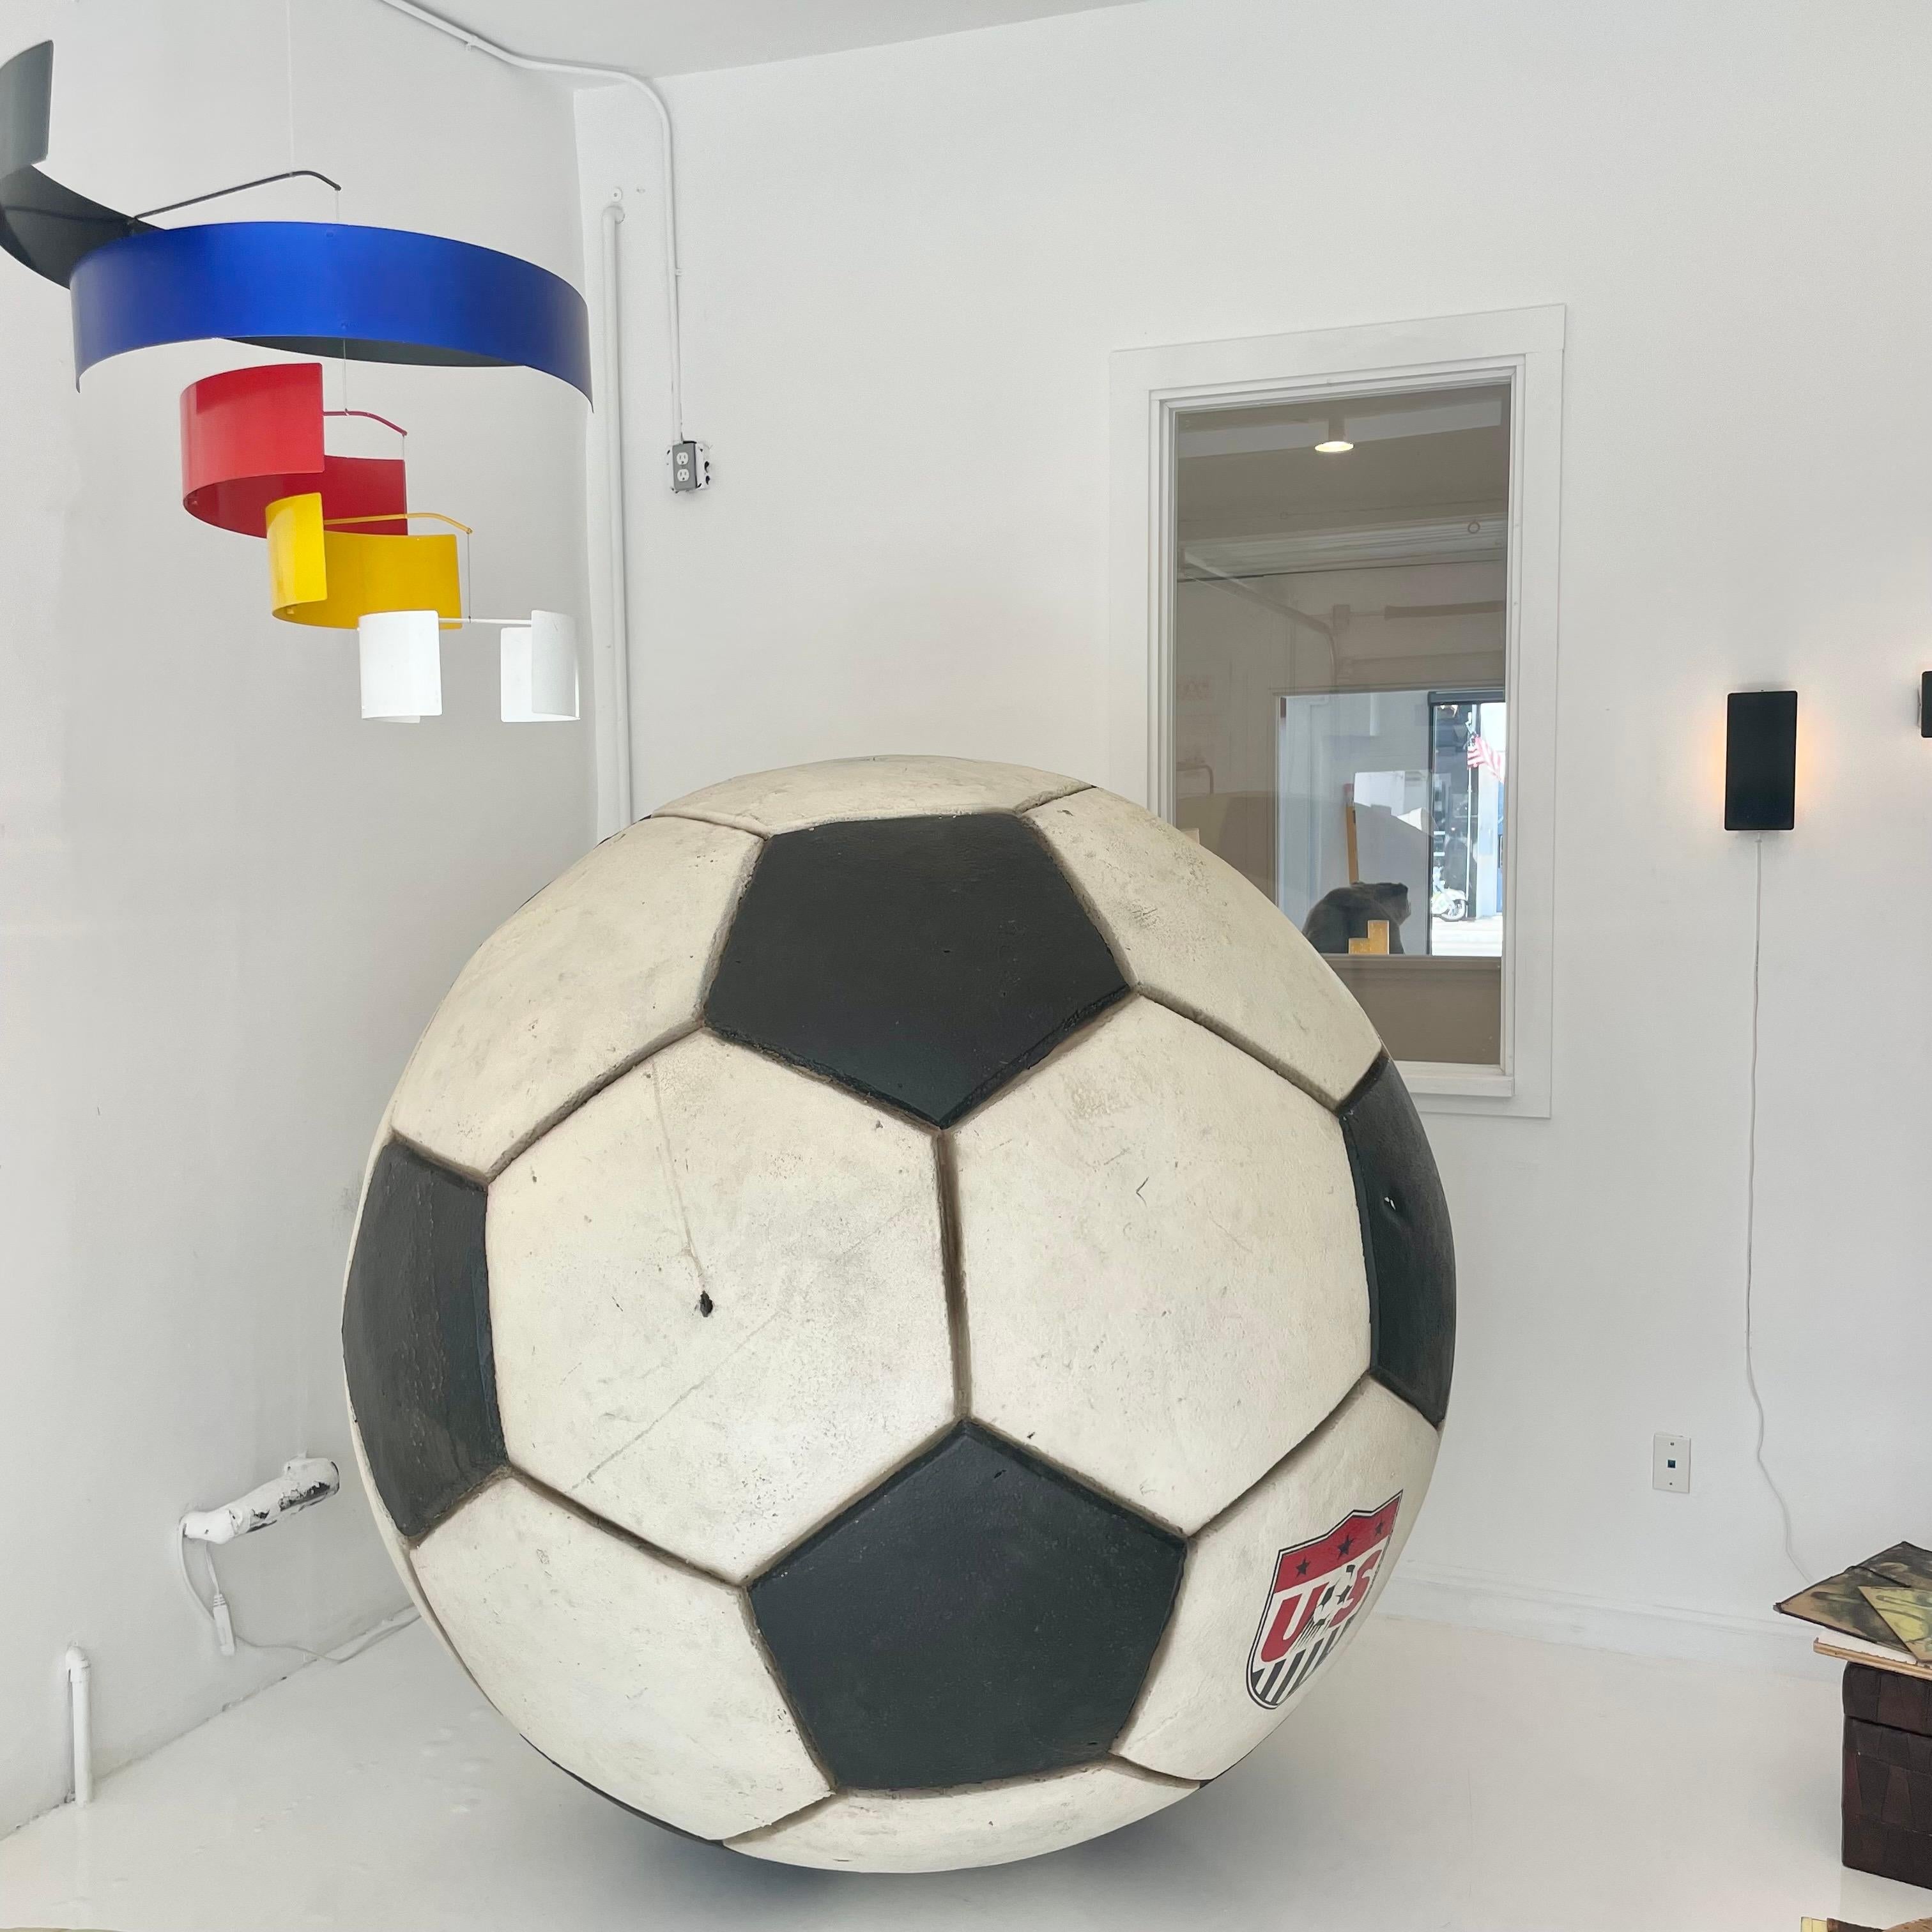 Gigantic soccer ball made of very hard foam. Weighted ball inside so that it stays where you place it. Metal loop on top for hanging from the ceiling if desired. US MENS SOCCER logo on the front. Approximately 80 pounds. Great coloring. Some scuffs,